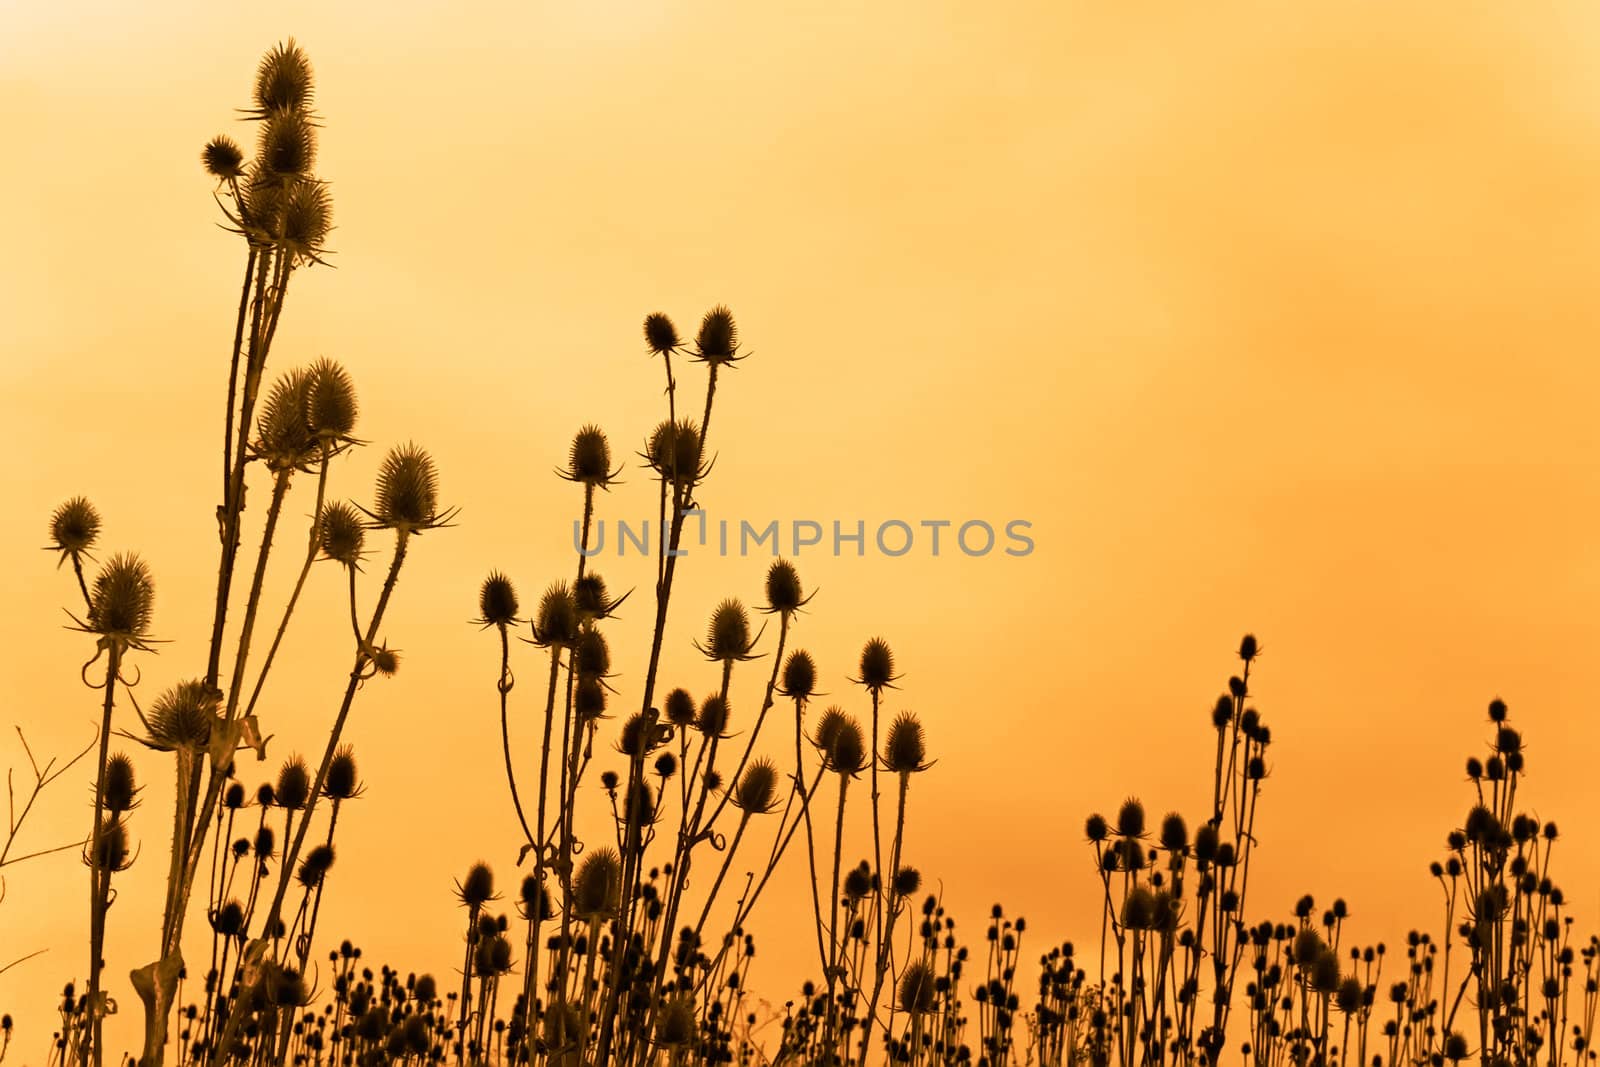 A field of dried teasel flowers against funereal sky. Sepia